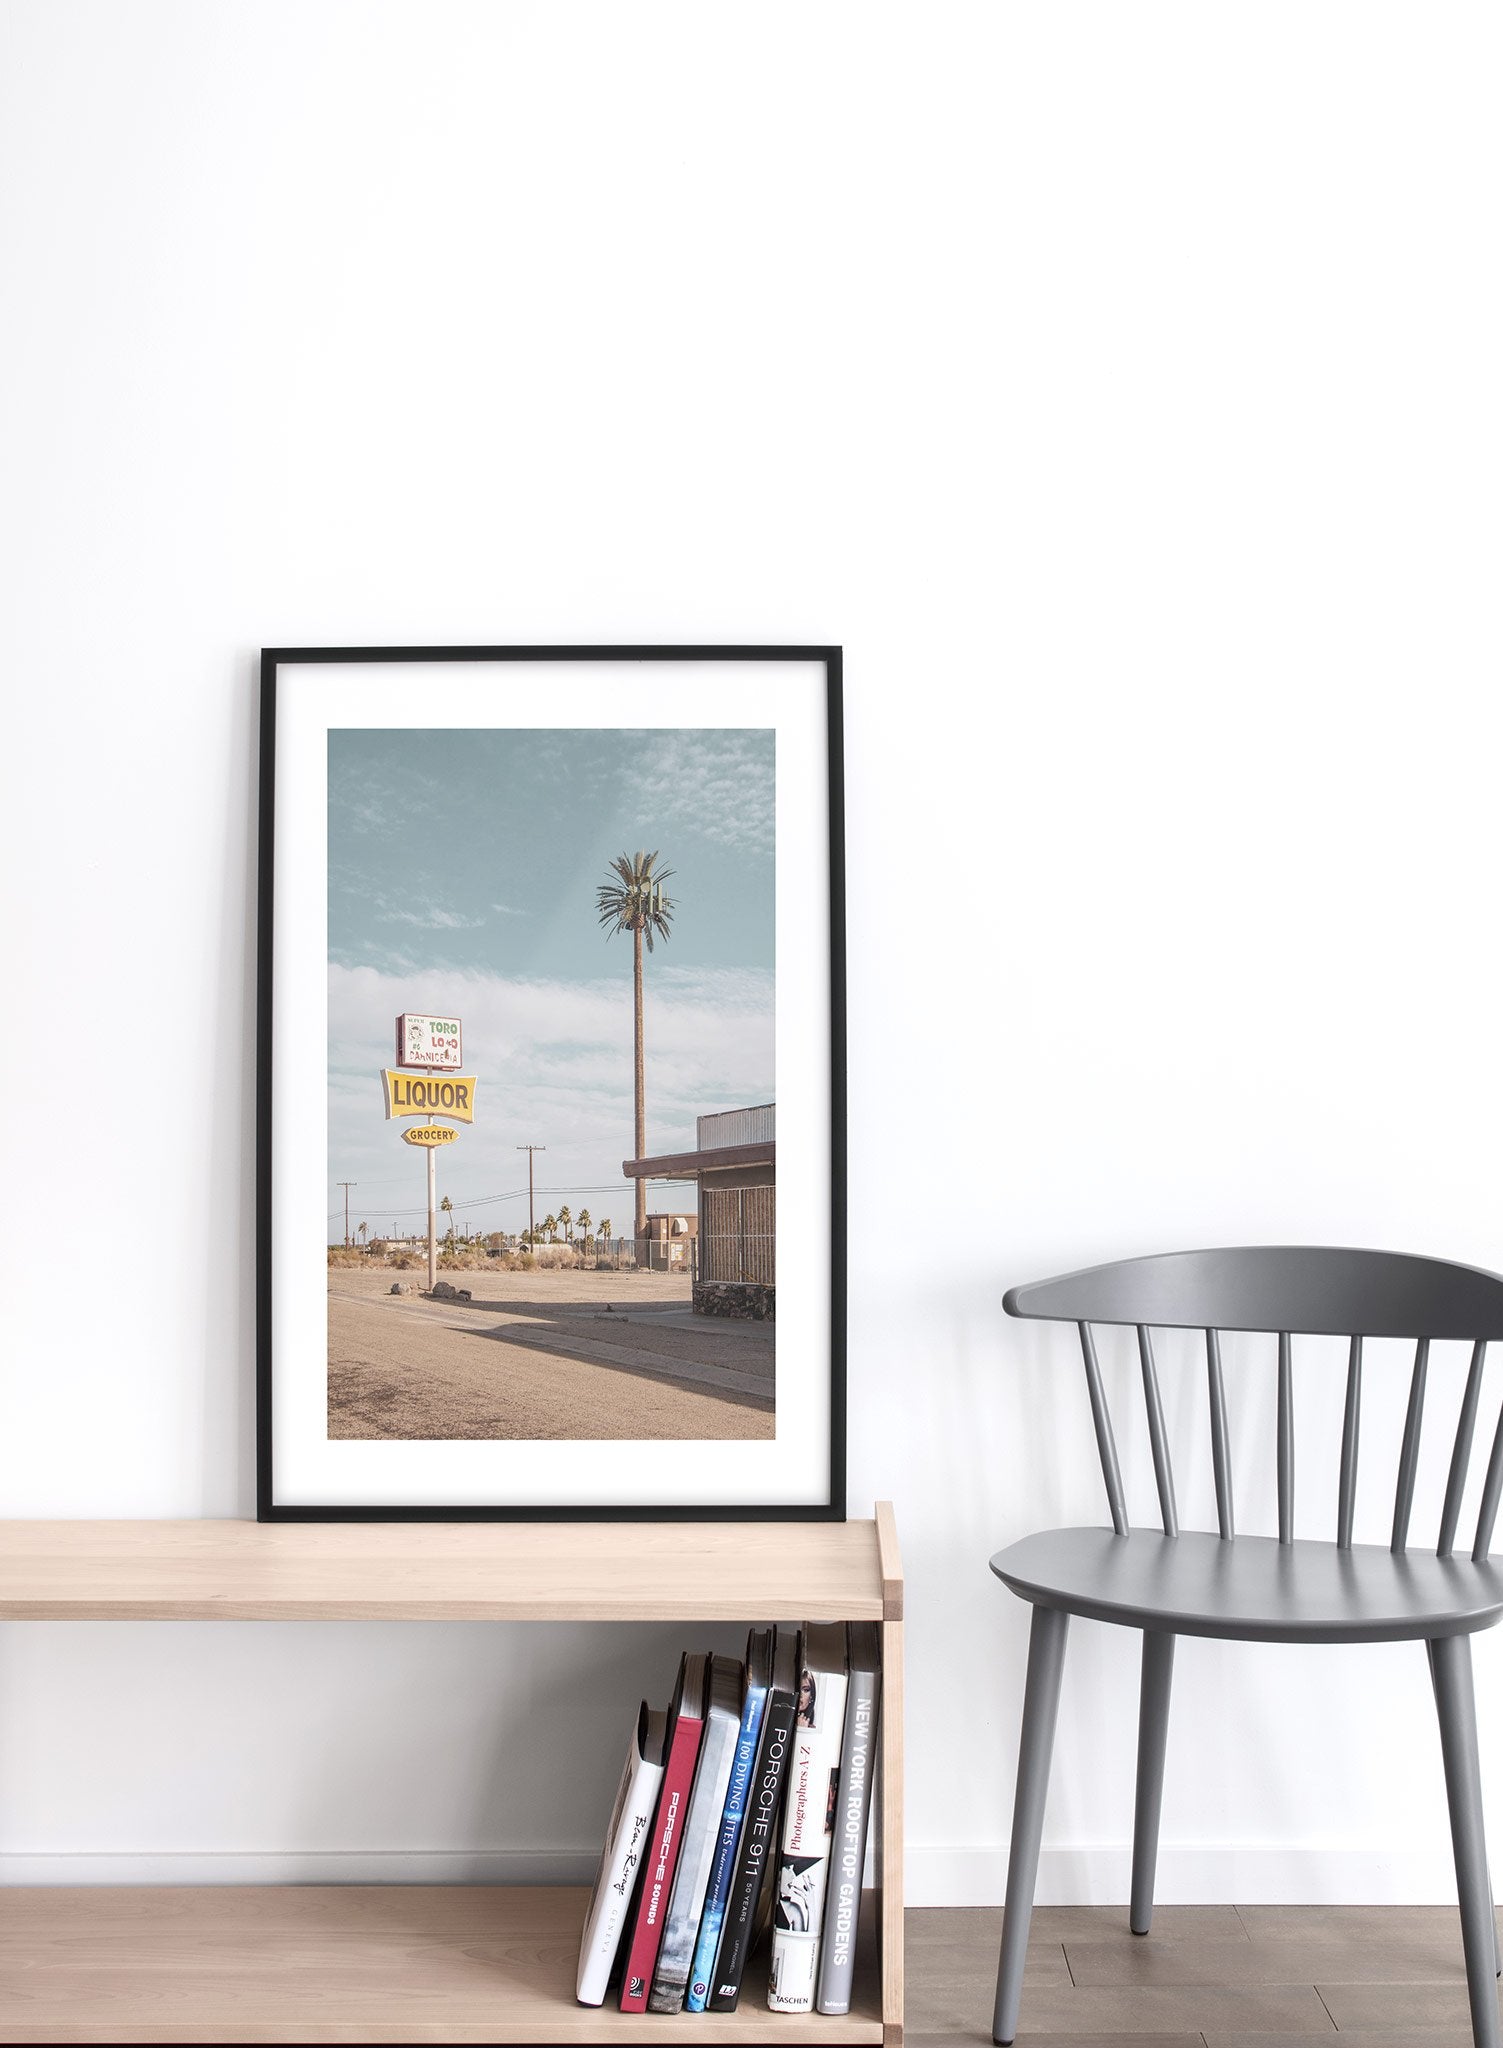 Modern minimalist photography poster by Opposite Wall with picture of road sign - Lifestyle - Living Room